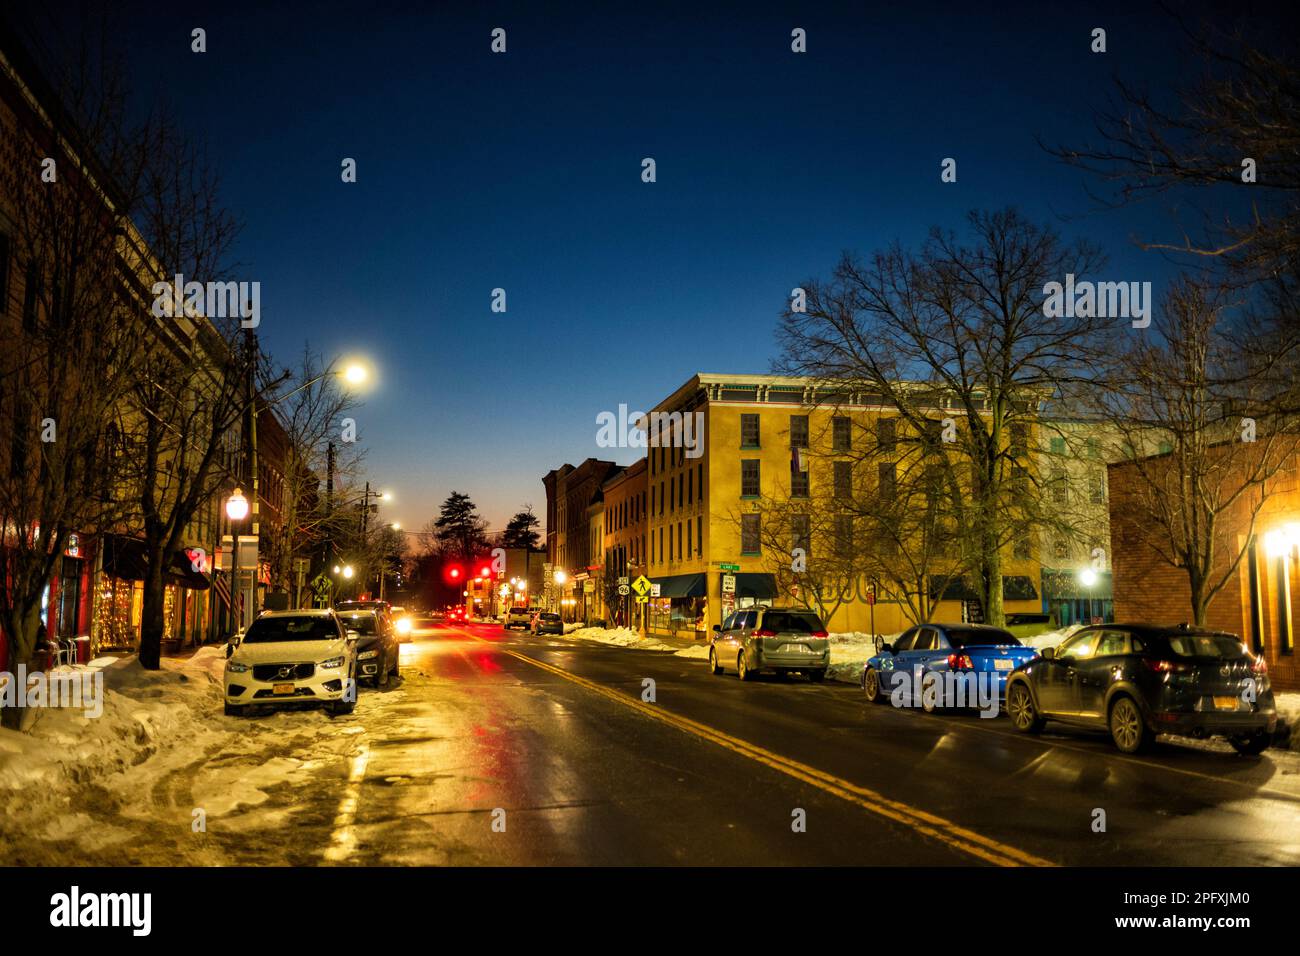 Owego, NY, USA - Feb 7, 2021: The town of Owego, seen here at night, is filled with local shops and restaurants.  In 2009 it was voted 'coolest small Stock Photo